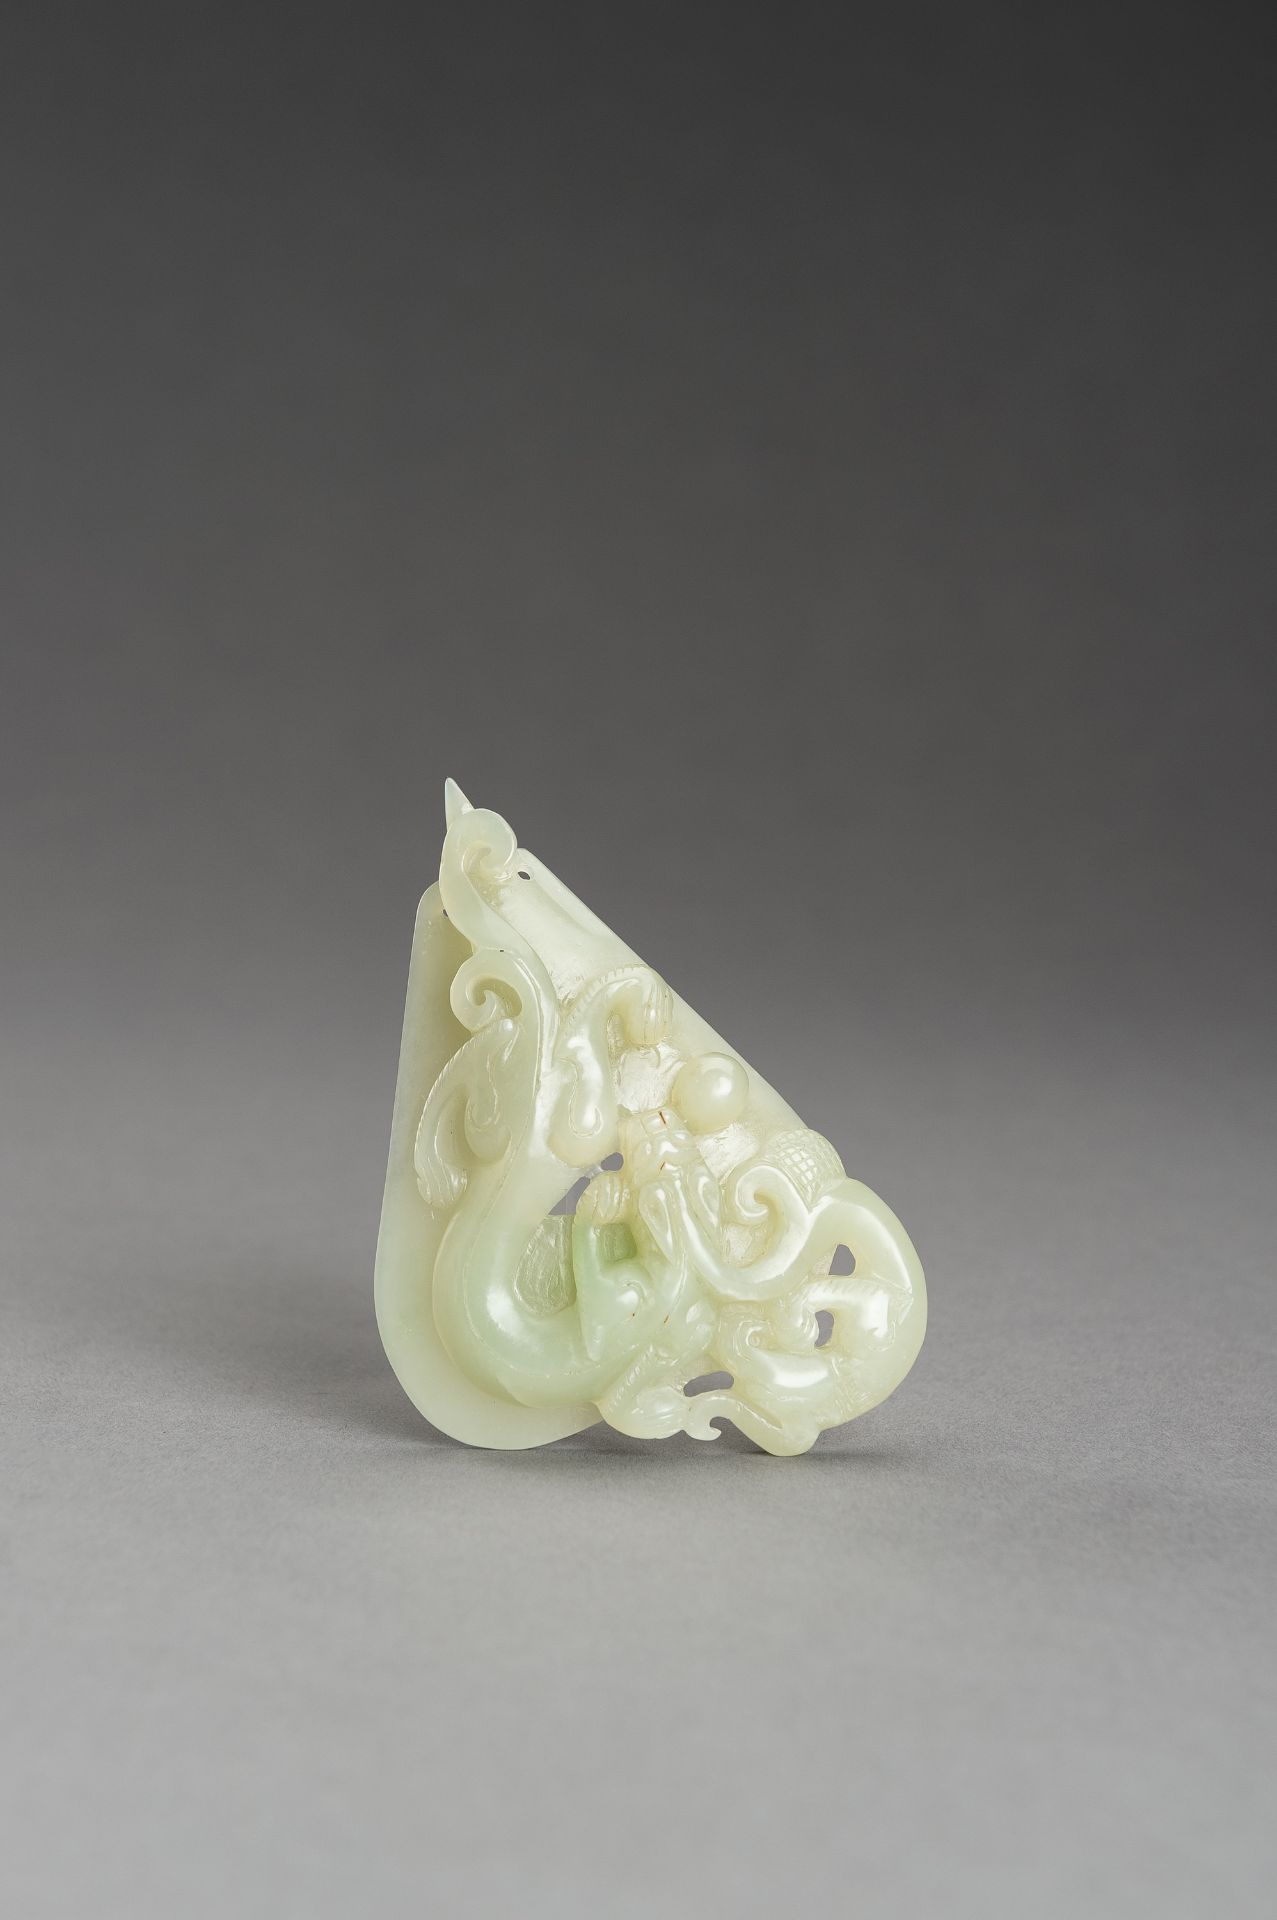 AN ARCHAISTIC PALE CELADON JADE PENDANT OF A CHILONG, 1920s - Image 12 of 14